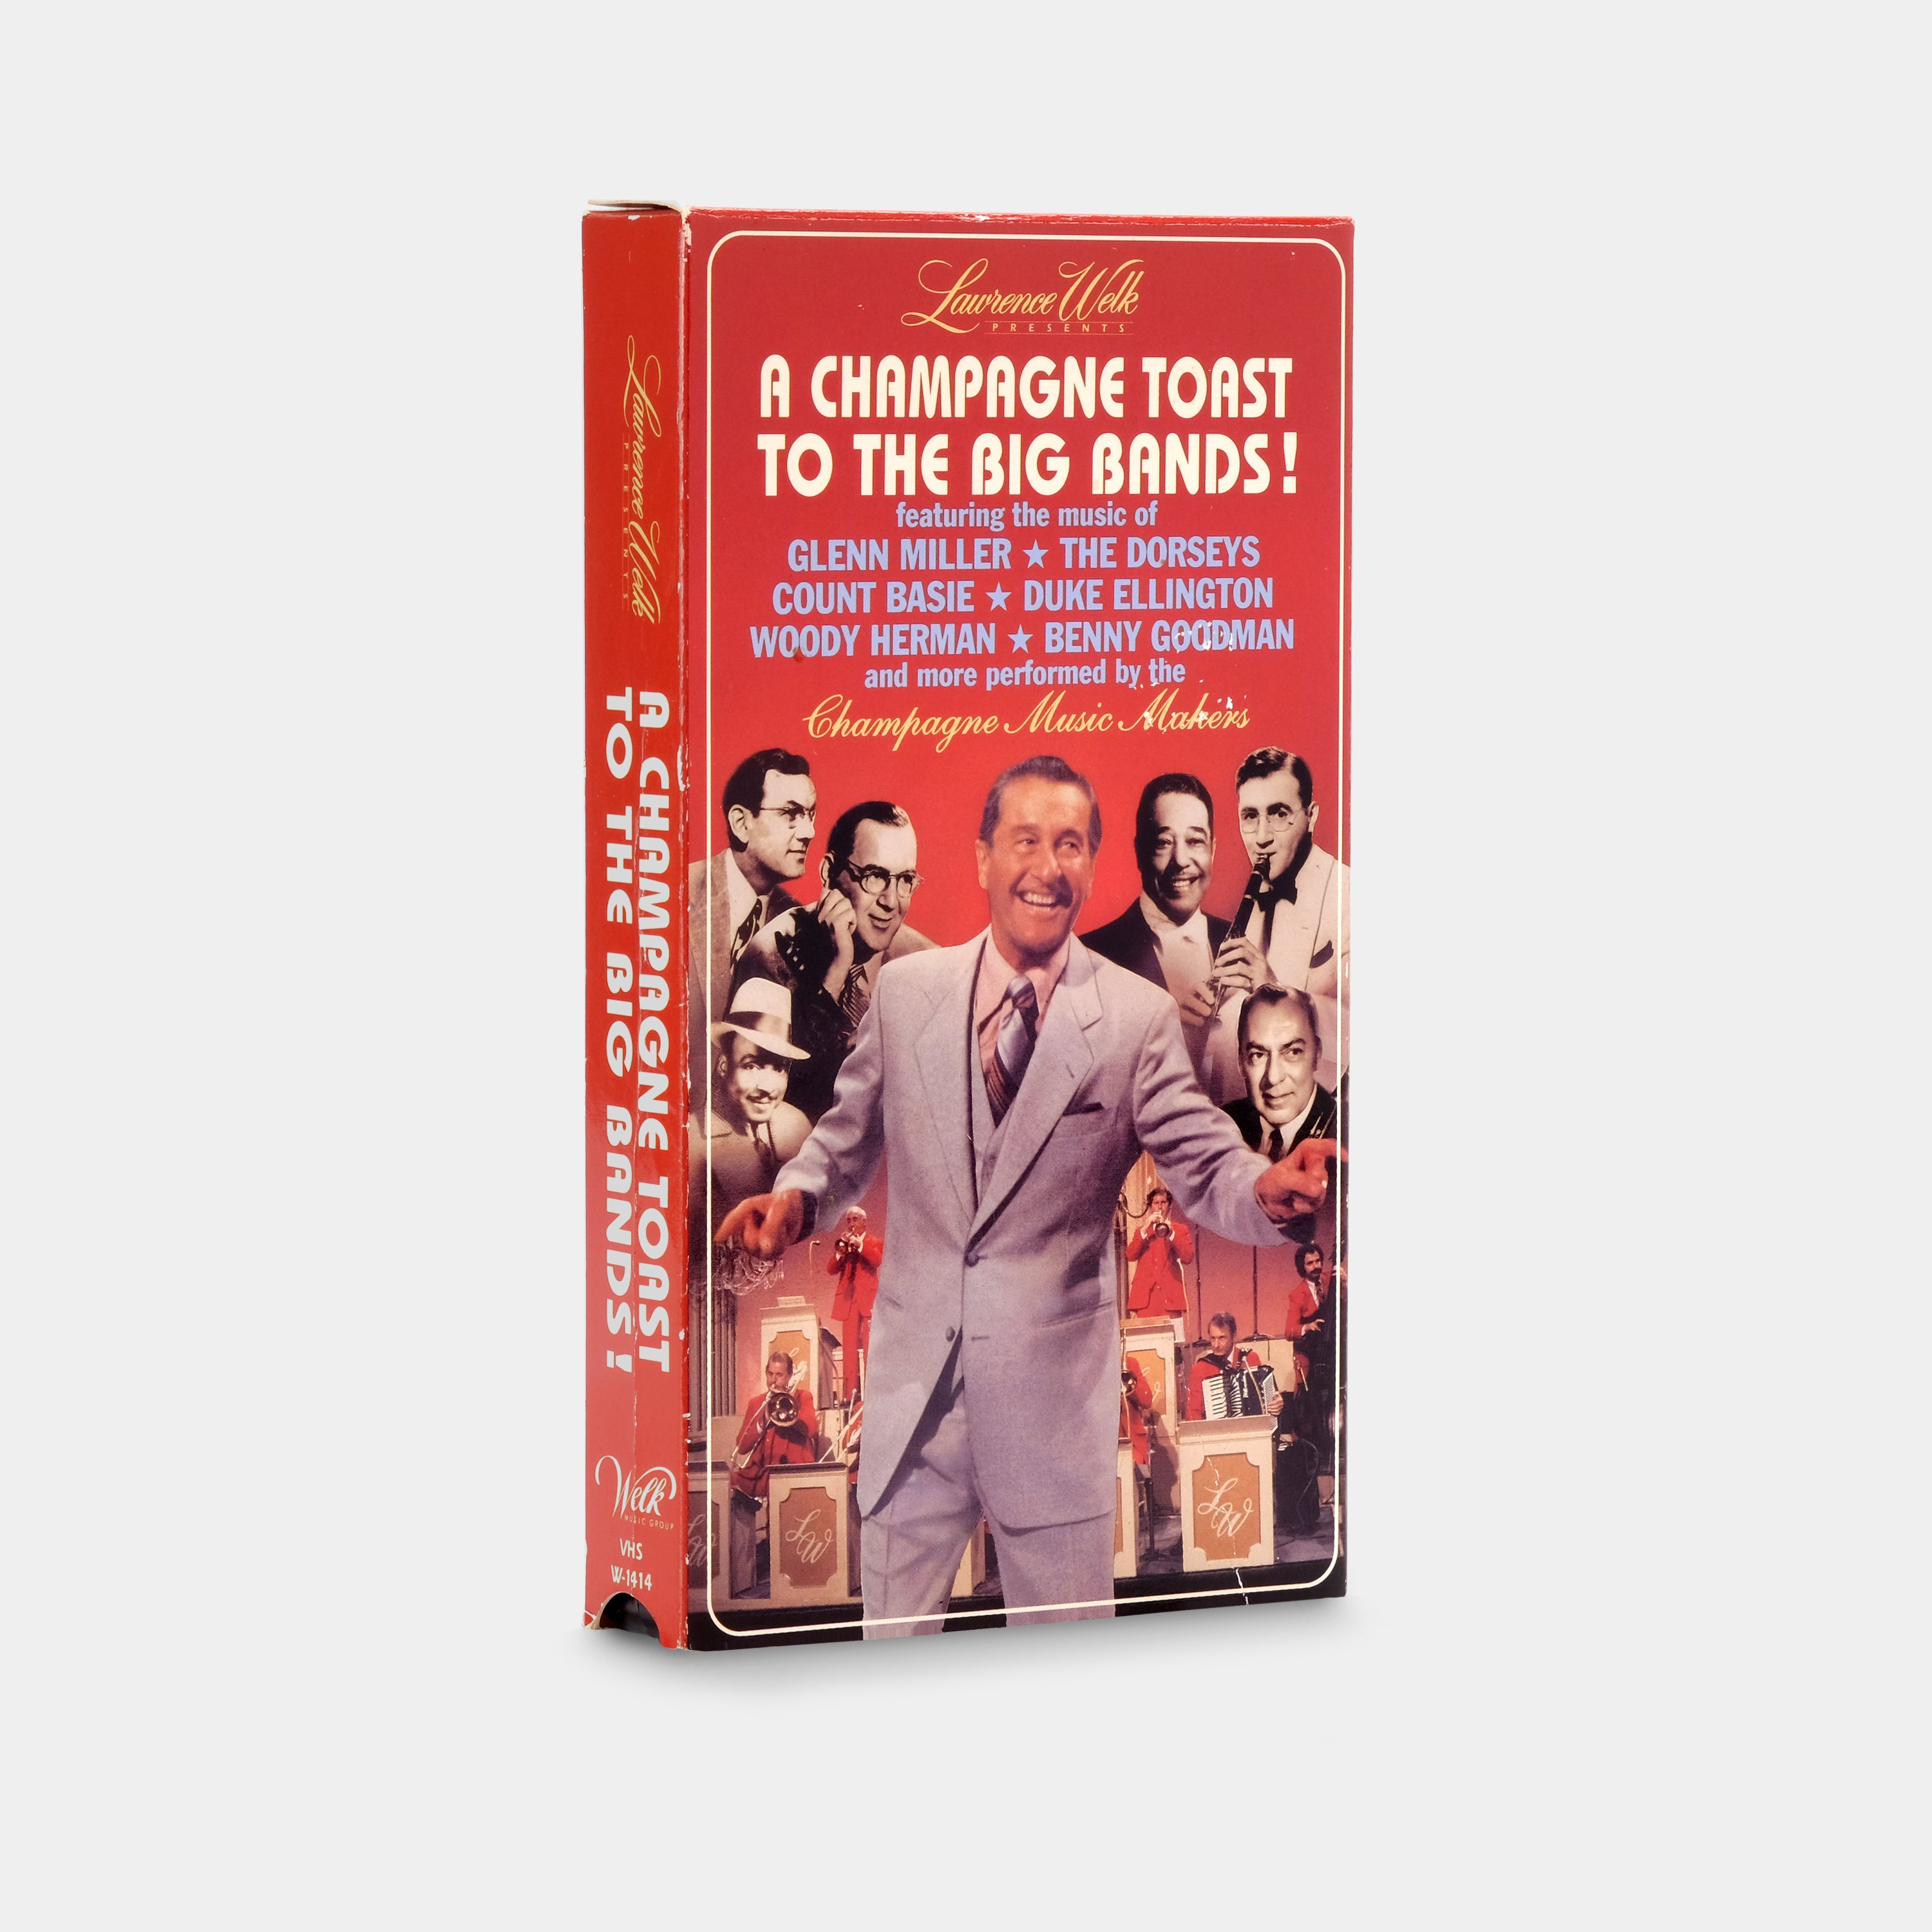 A Champagne Toast To The Big Bands! VHS Tape